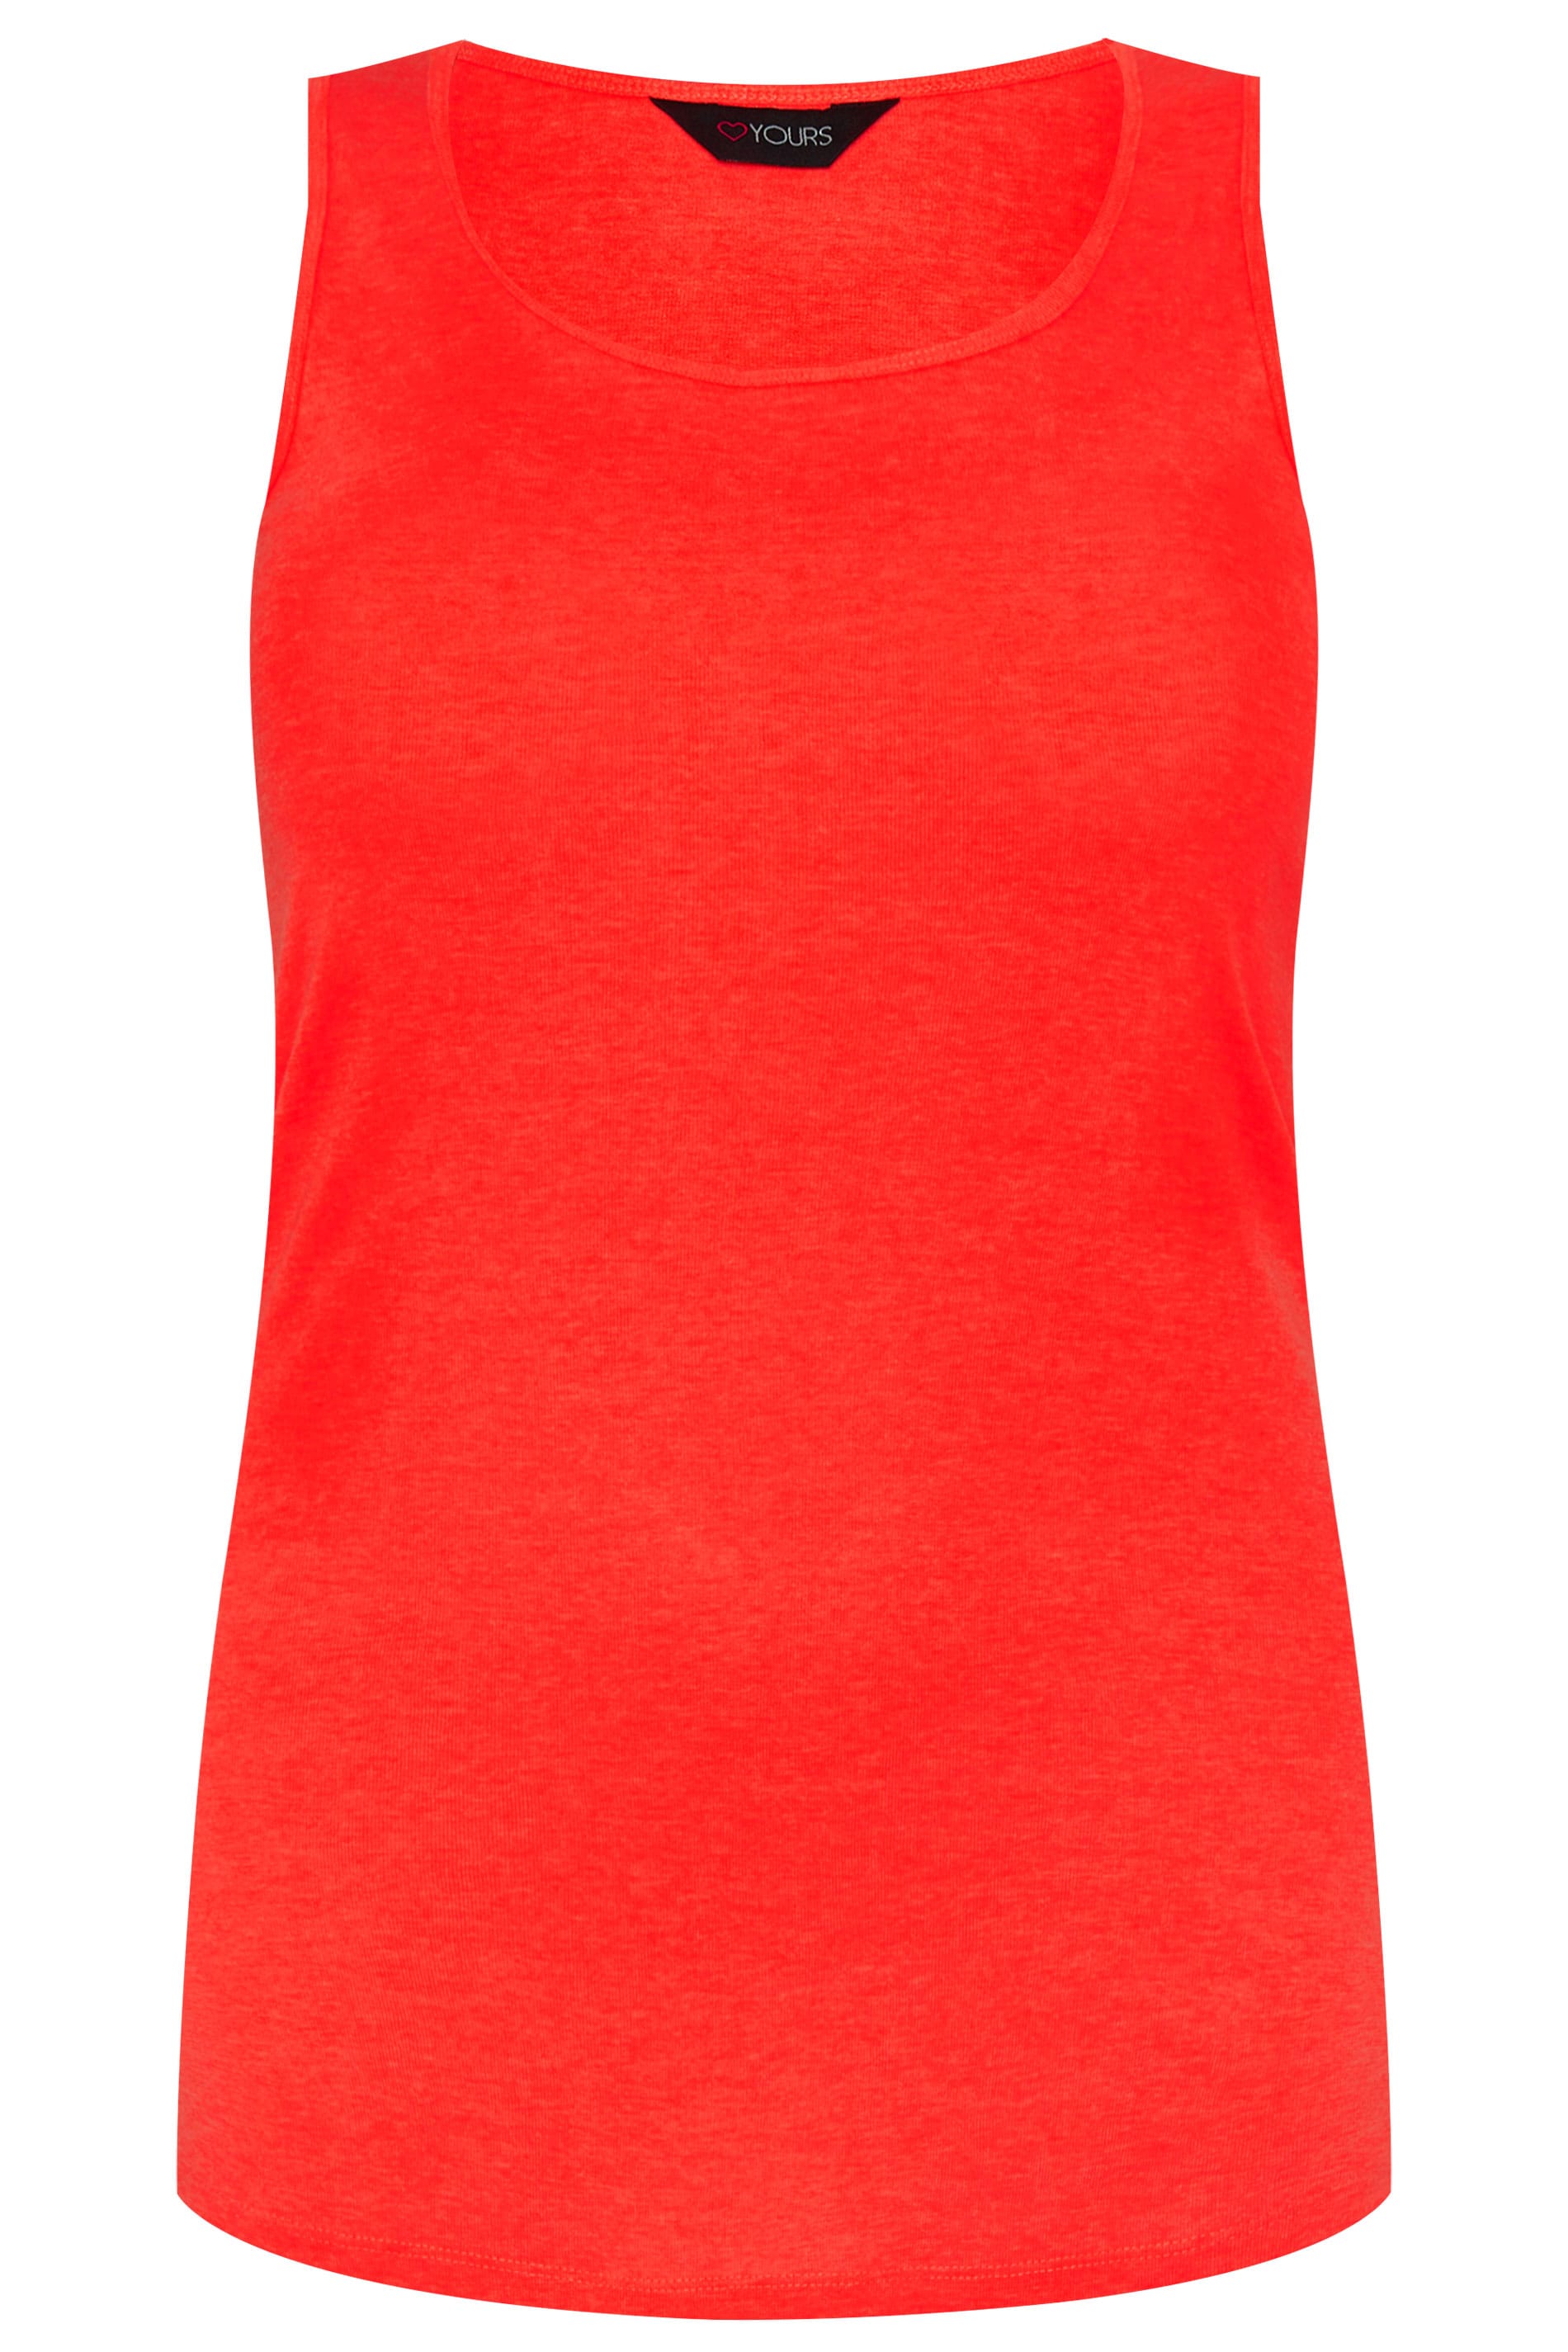 Plus Size Red Vest Top| Sizes 16 to 36 | Yours Clothing